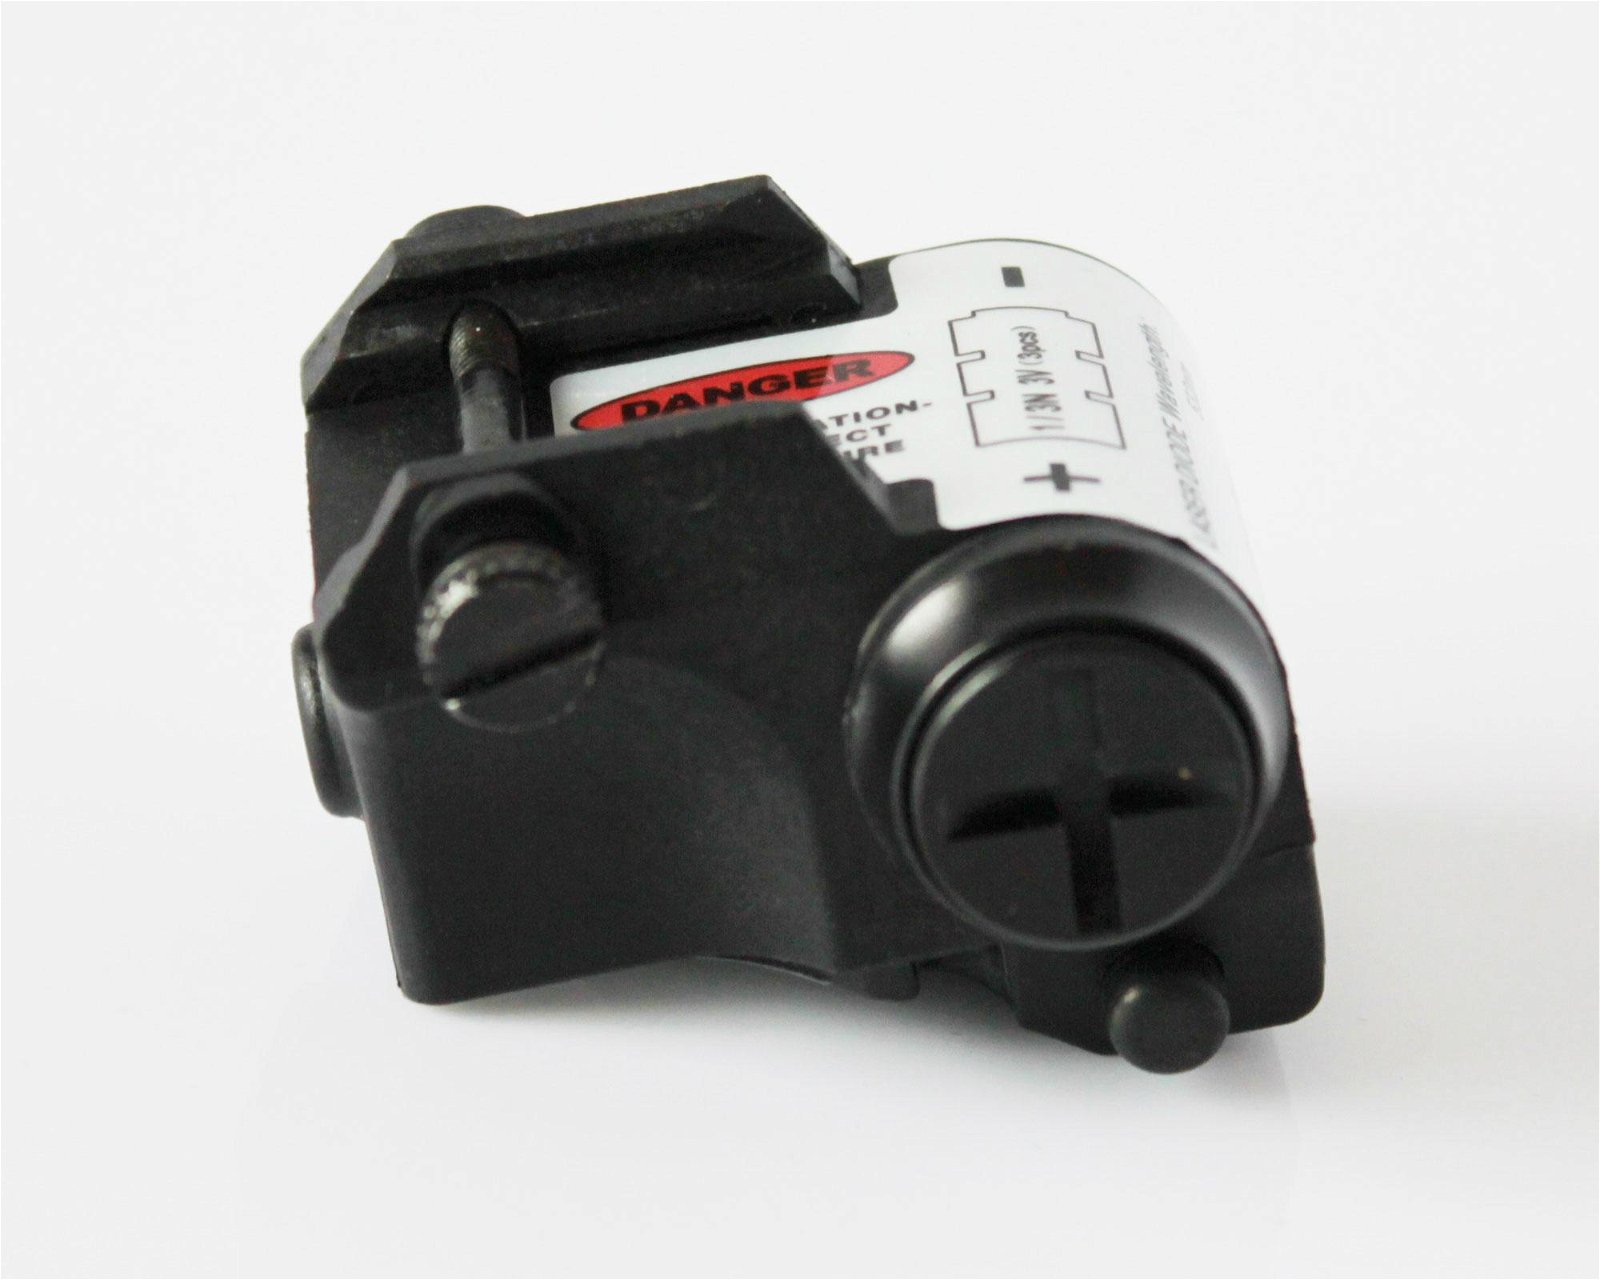 Subcompact green laser sight for pistol 2